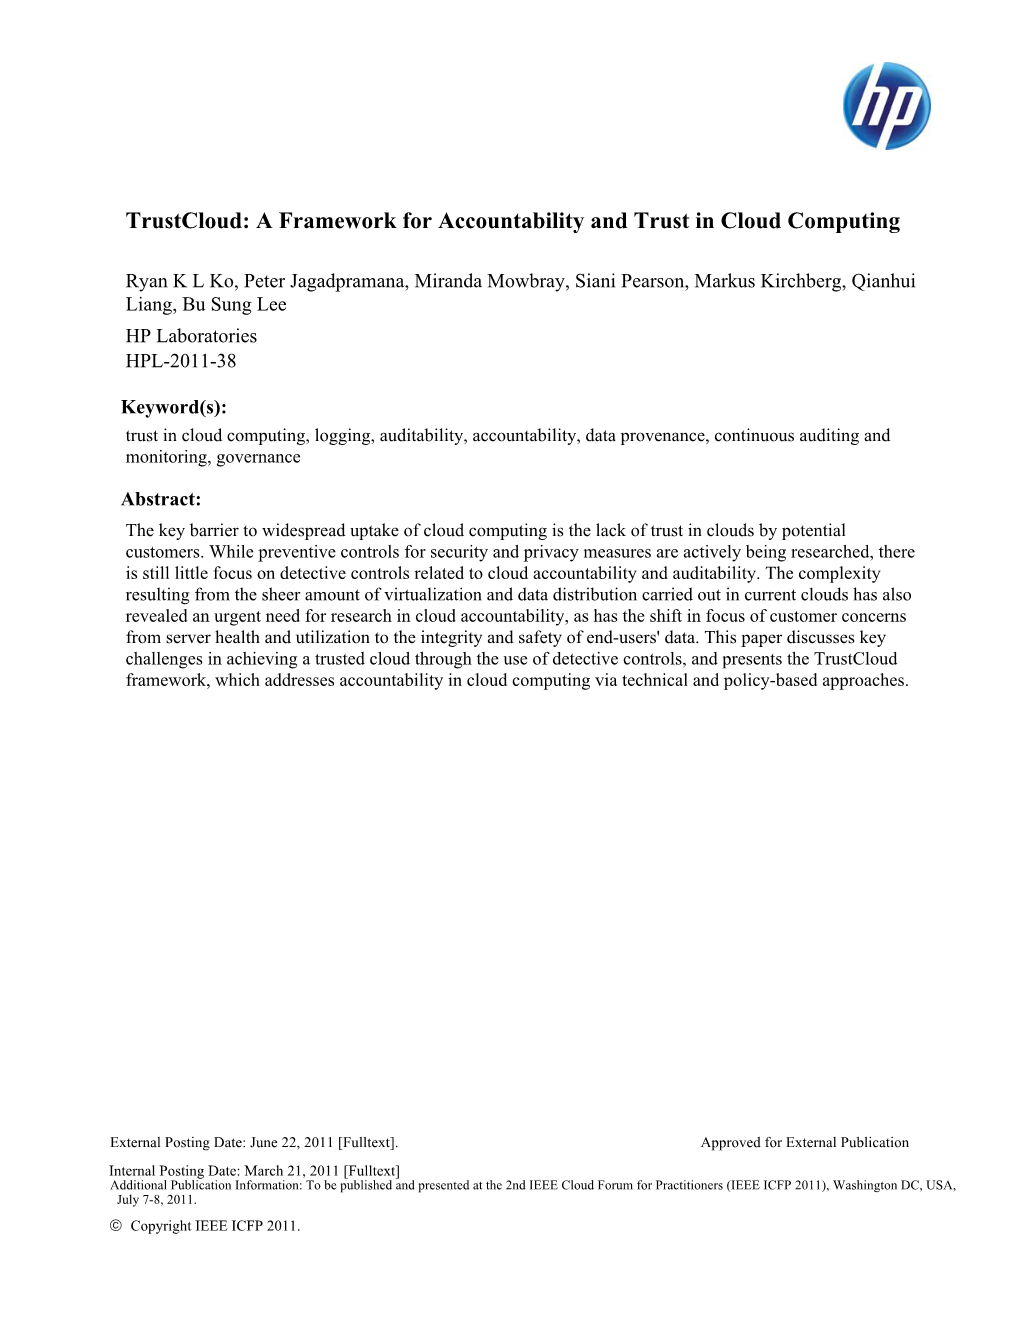 Trustcloud: a Framework for Accountability and Trust in Cloud Computing